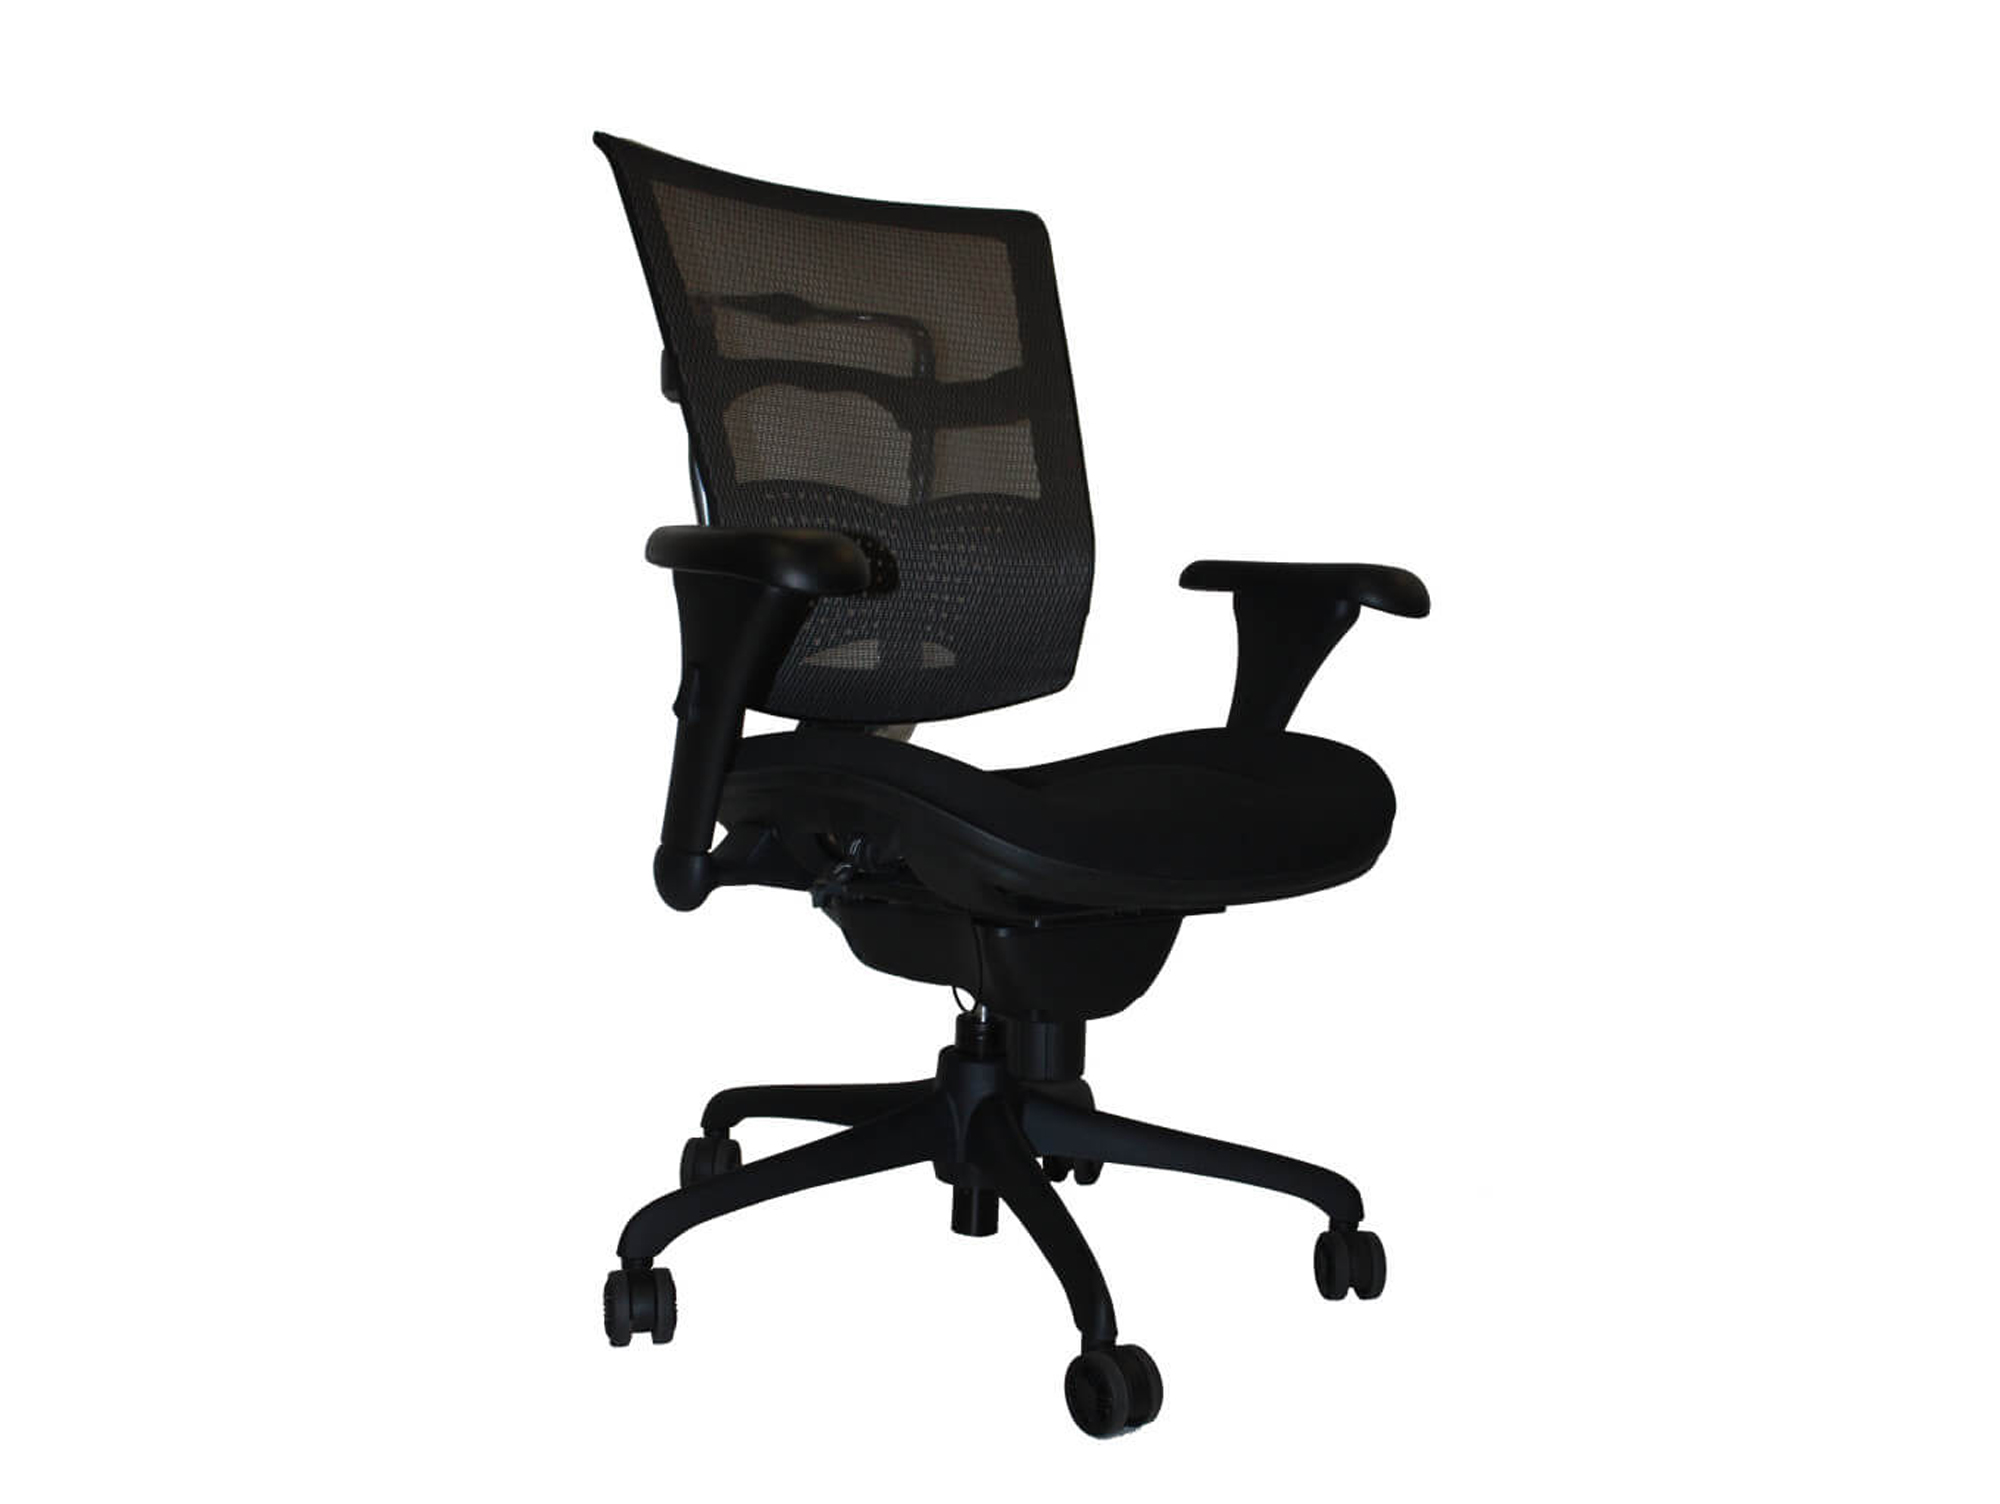 chairs-for-office-work-chairs-1.jpg